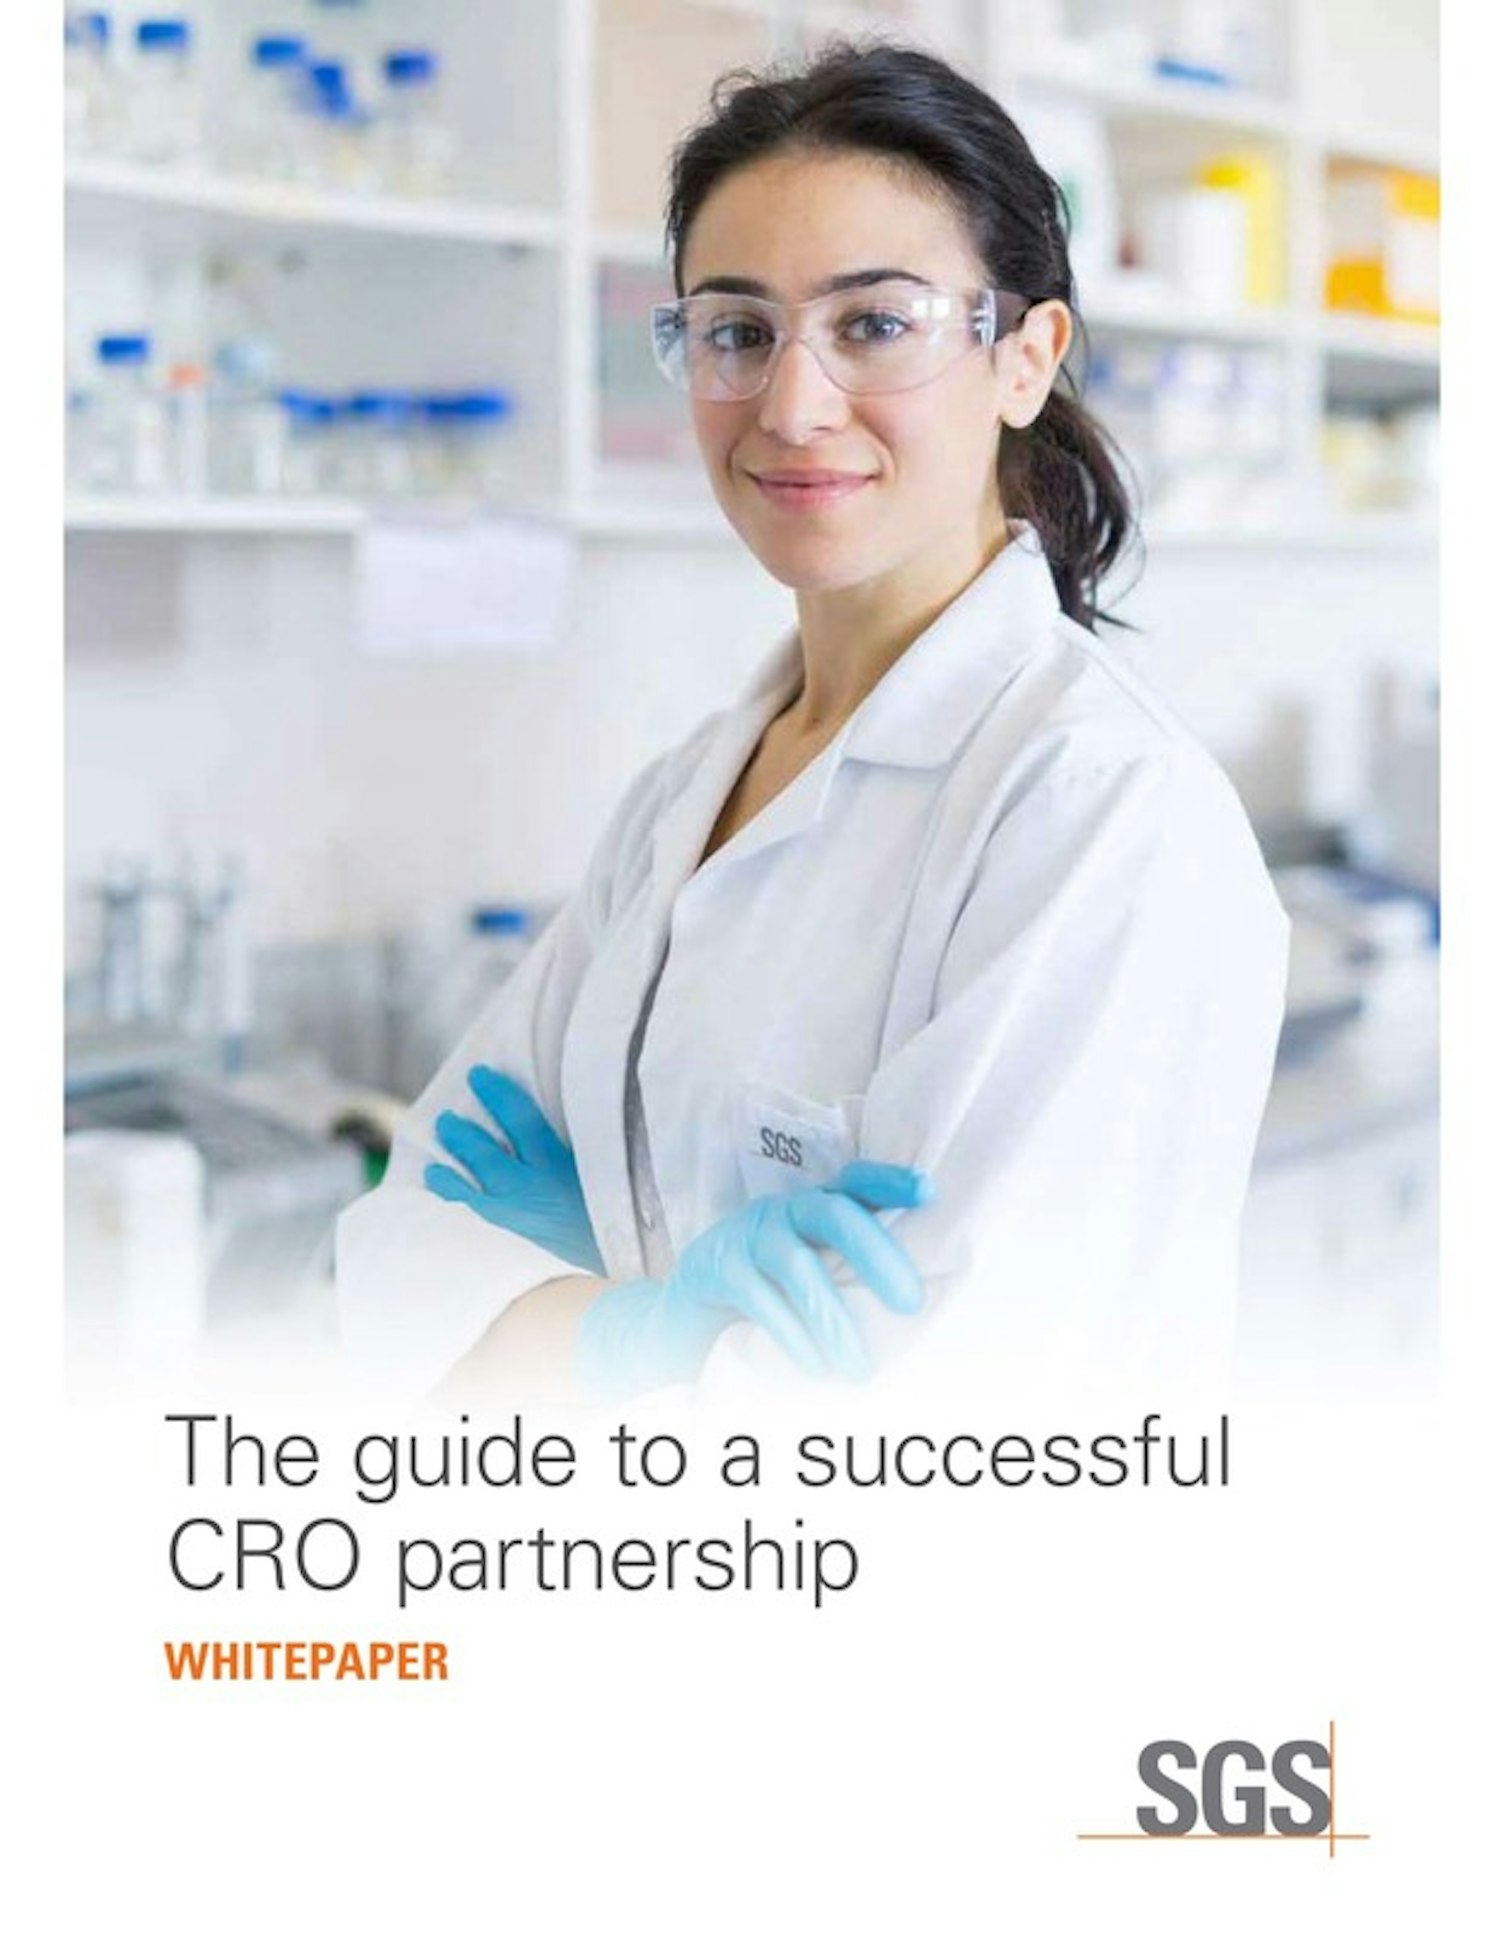 The Guide to a Successful CRO Partnership